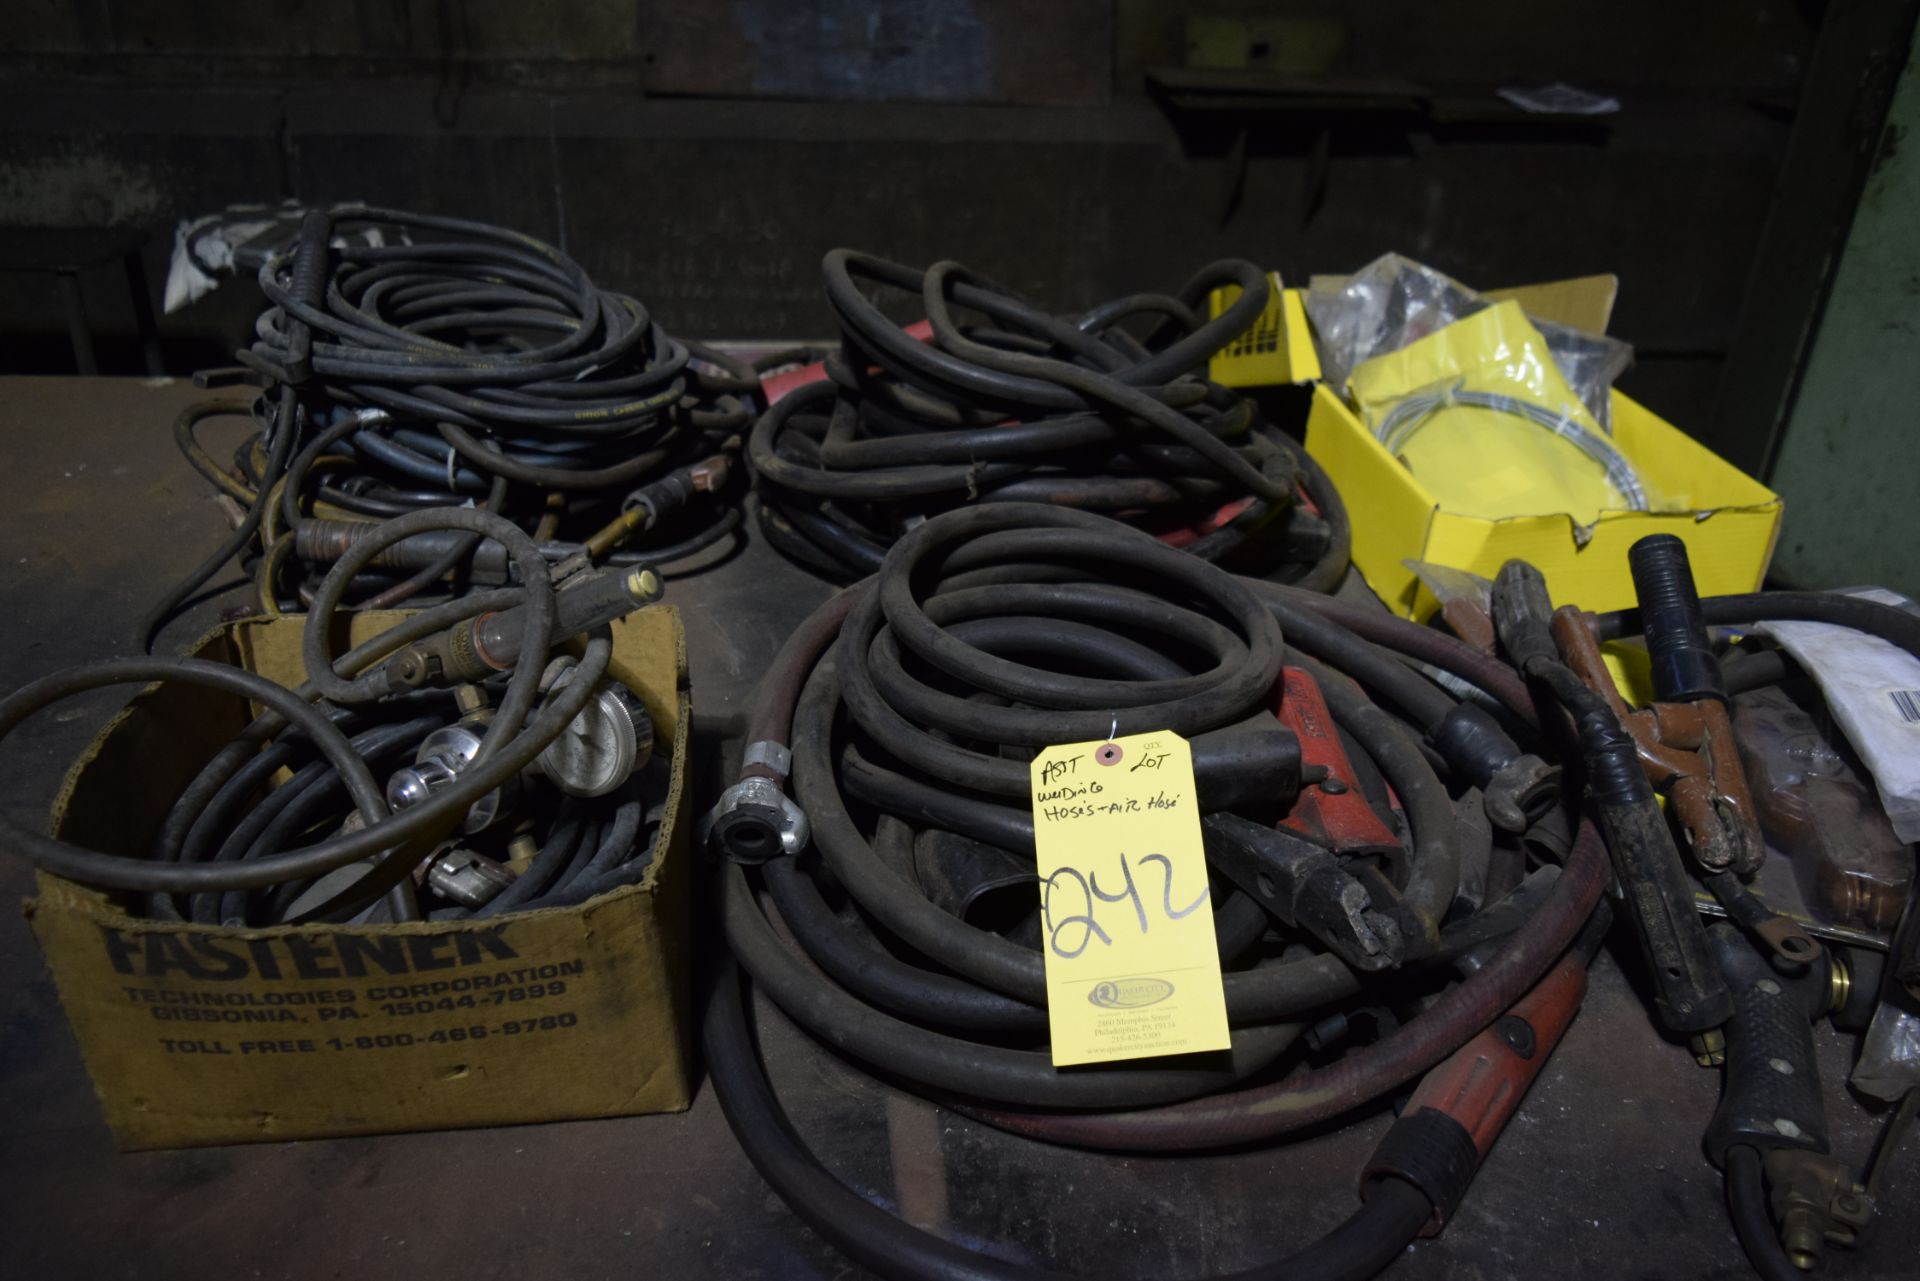 ASSORTED WELDING ITEMS ON TABLE